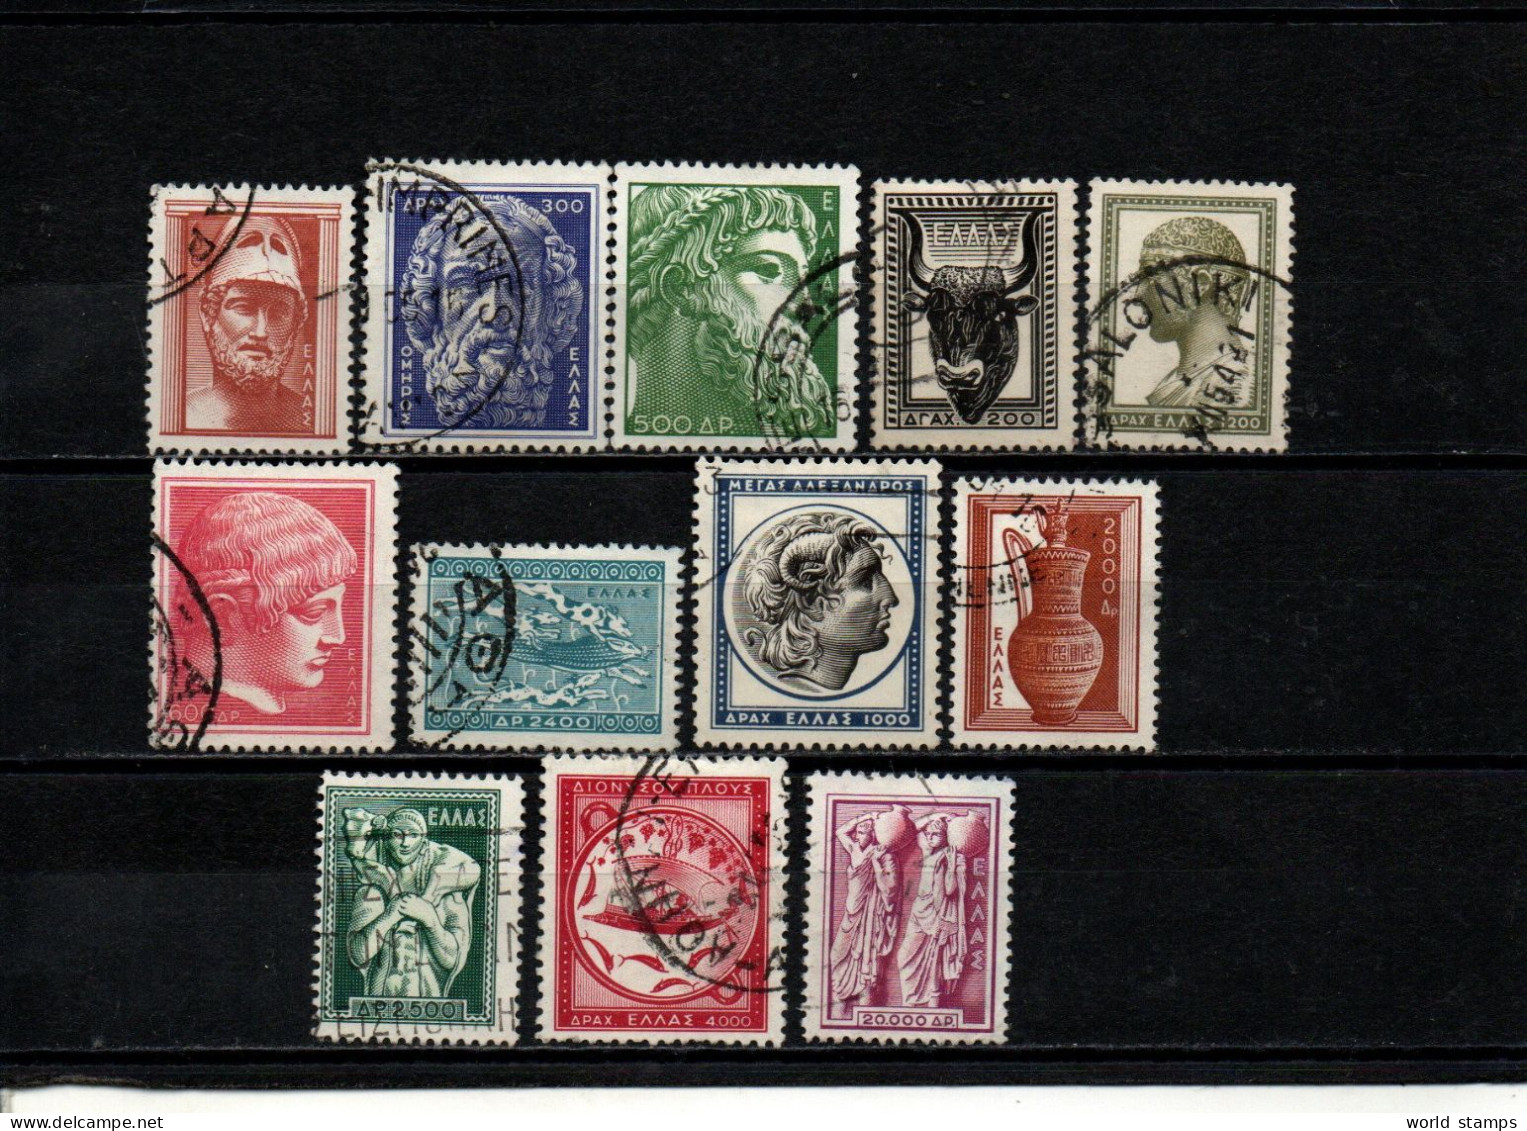 GRECE 1954 O - Used Stamps